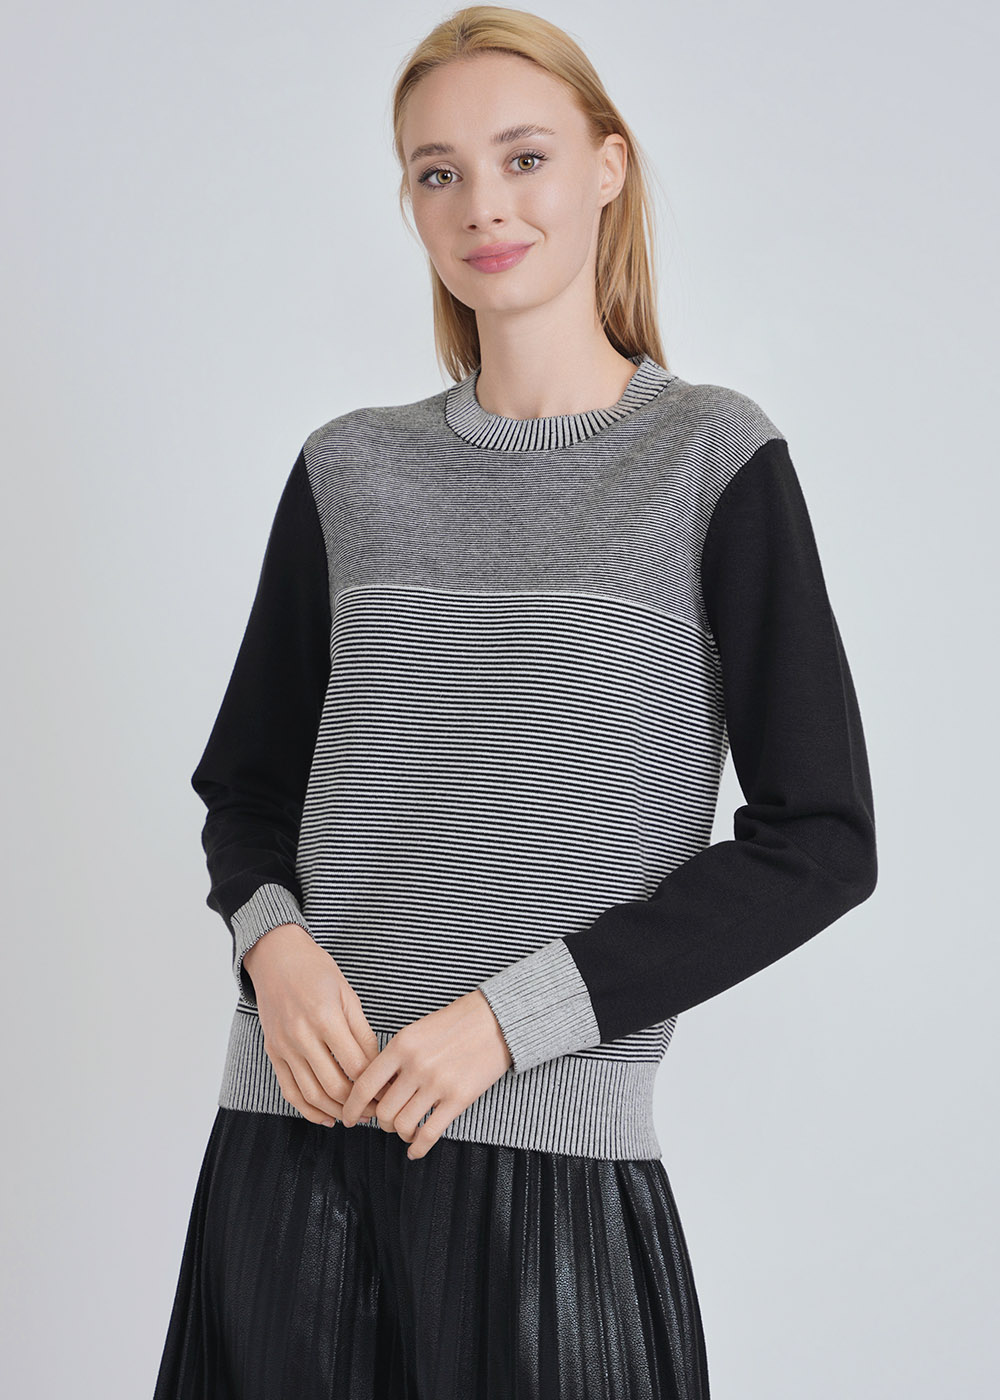 Dynamic Duo: Black Sleeved & Striped Core Knit Top